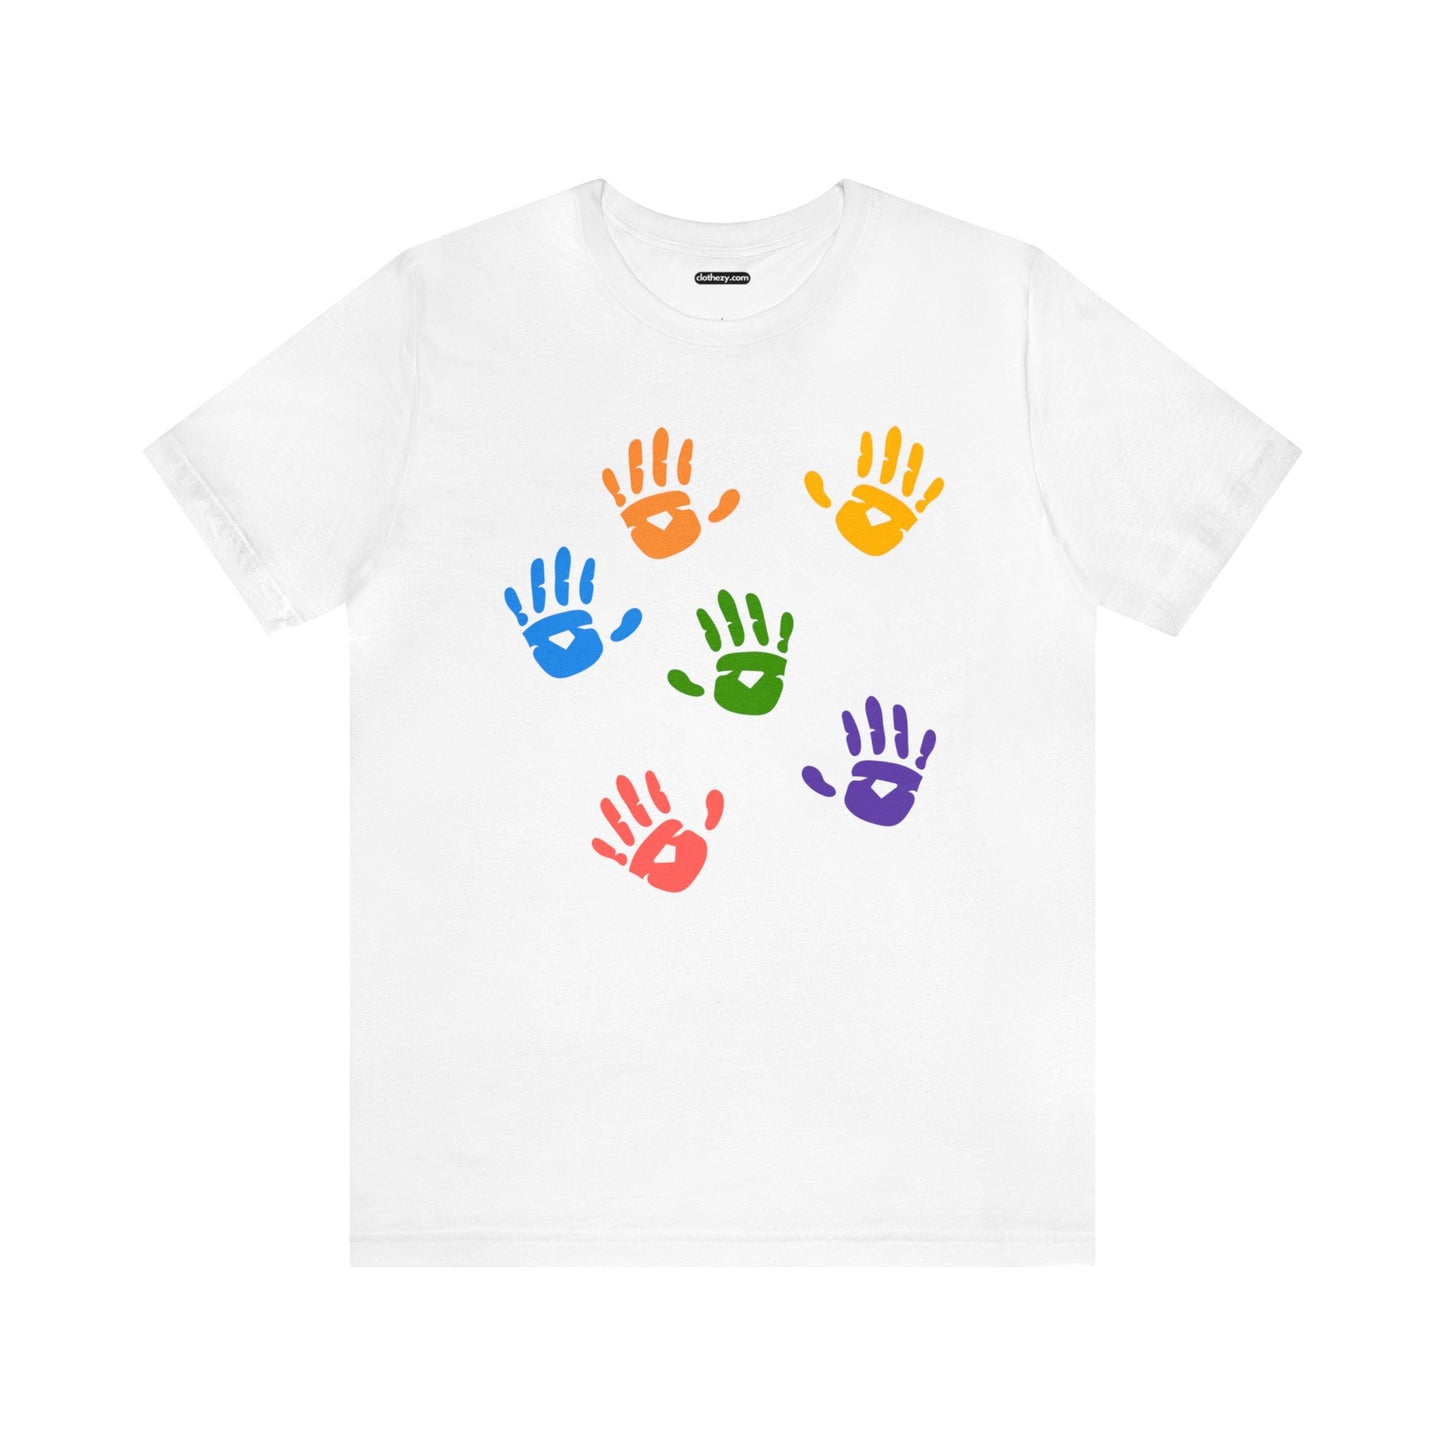 Rainbow Hand Prints T-Shirt - Unisex Adult Tee by clothezy.com in White - Buy Now